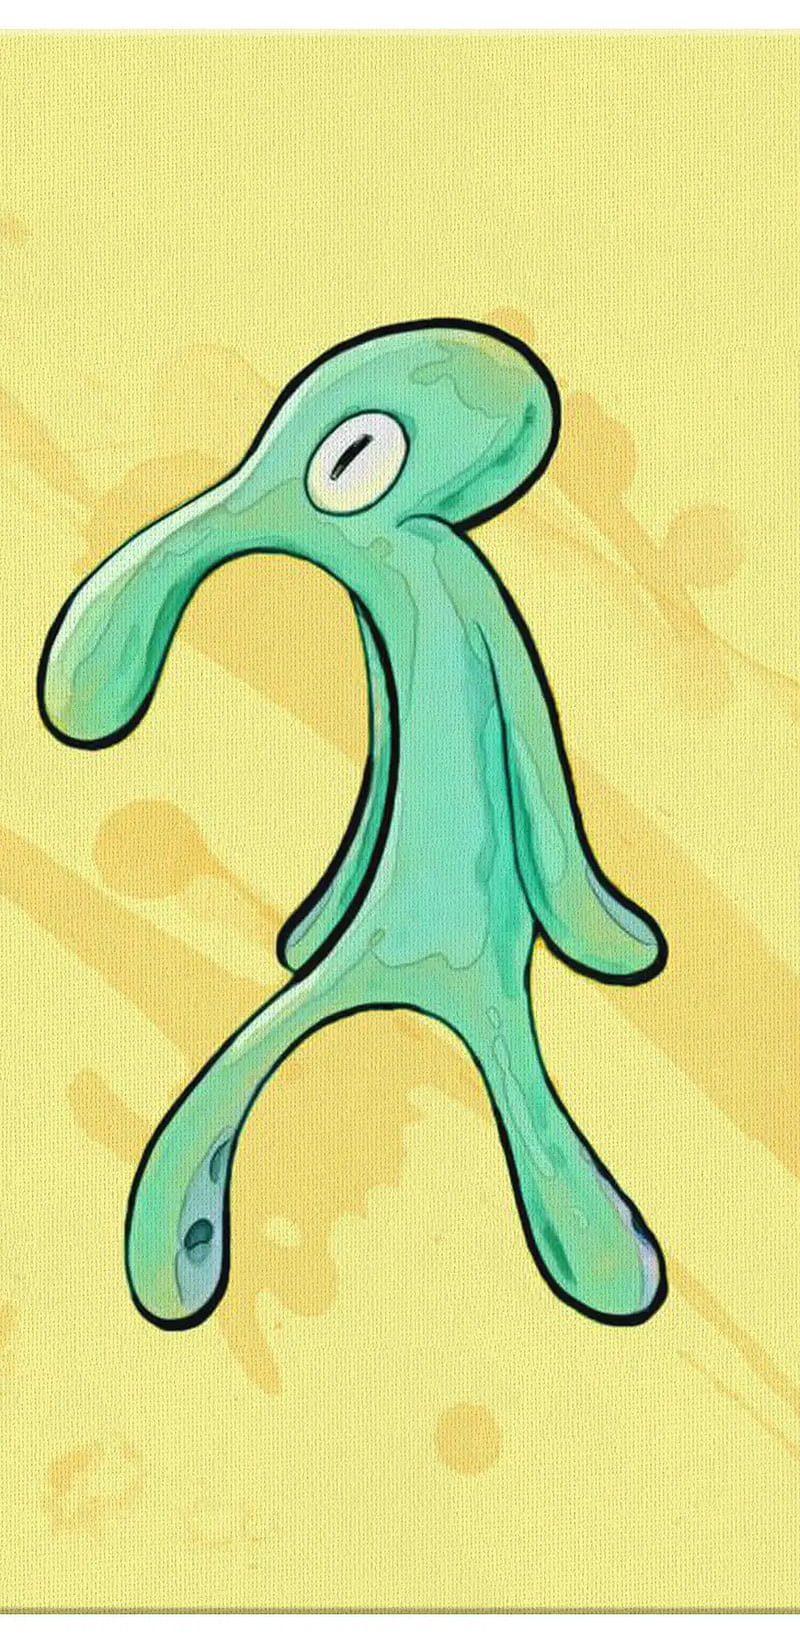 Handsome Squidward wallpaper by MomosWallpapers  Download on ZEDGE  9c70